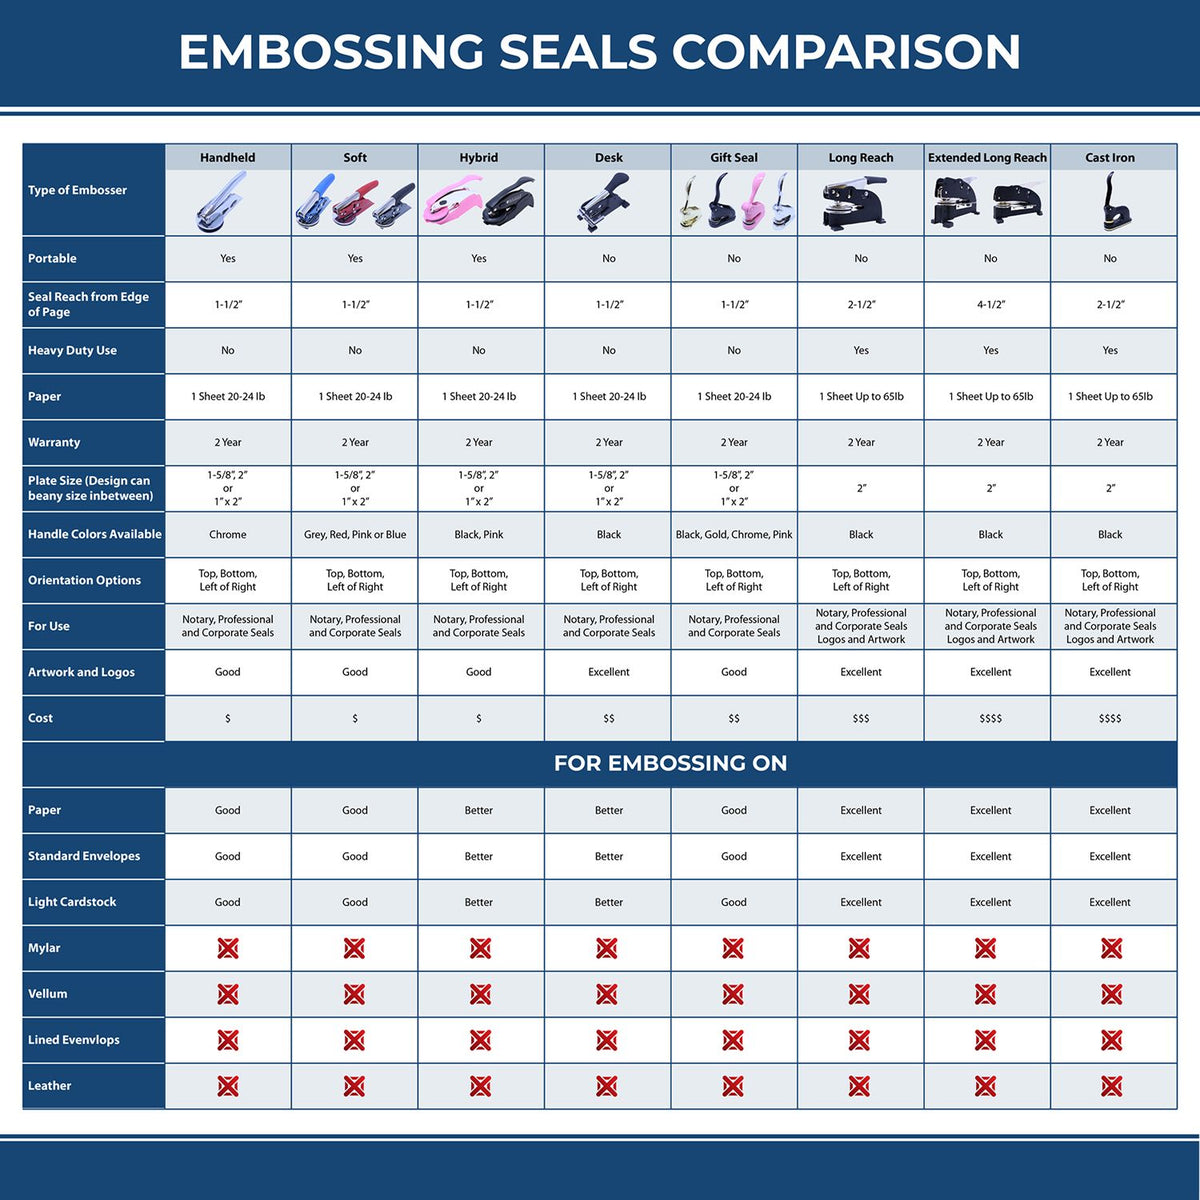 A comparison chart for the different types of mount models available for the Handheld Pennsylvania Architect Seal Embosser.